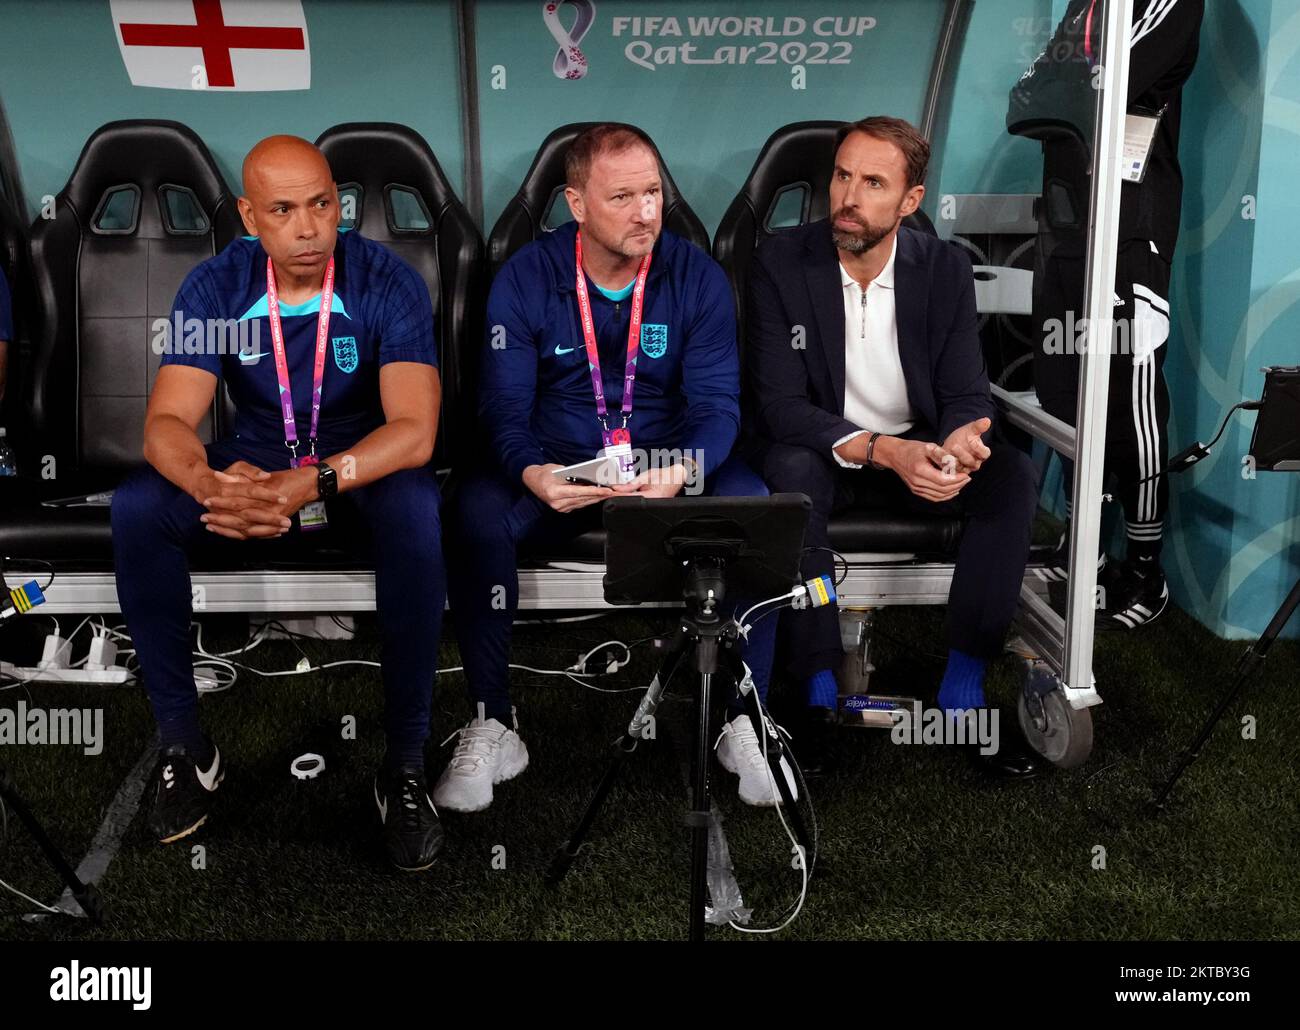 England manager Gareth Southgate with assistant Steve Holland (centre) and coach Paul Nevin (left) ahead of the FIFA World Cup Group B match at the Ahmad Bin Ali Stadium, Al Rayyan, Qatar. Picture date: Tuesday November 29, 2022. Stock Photo